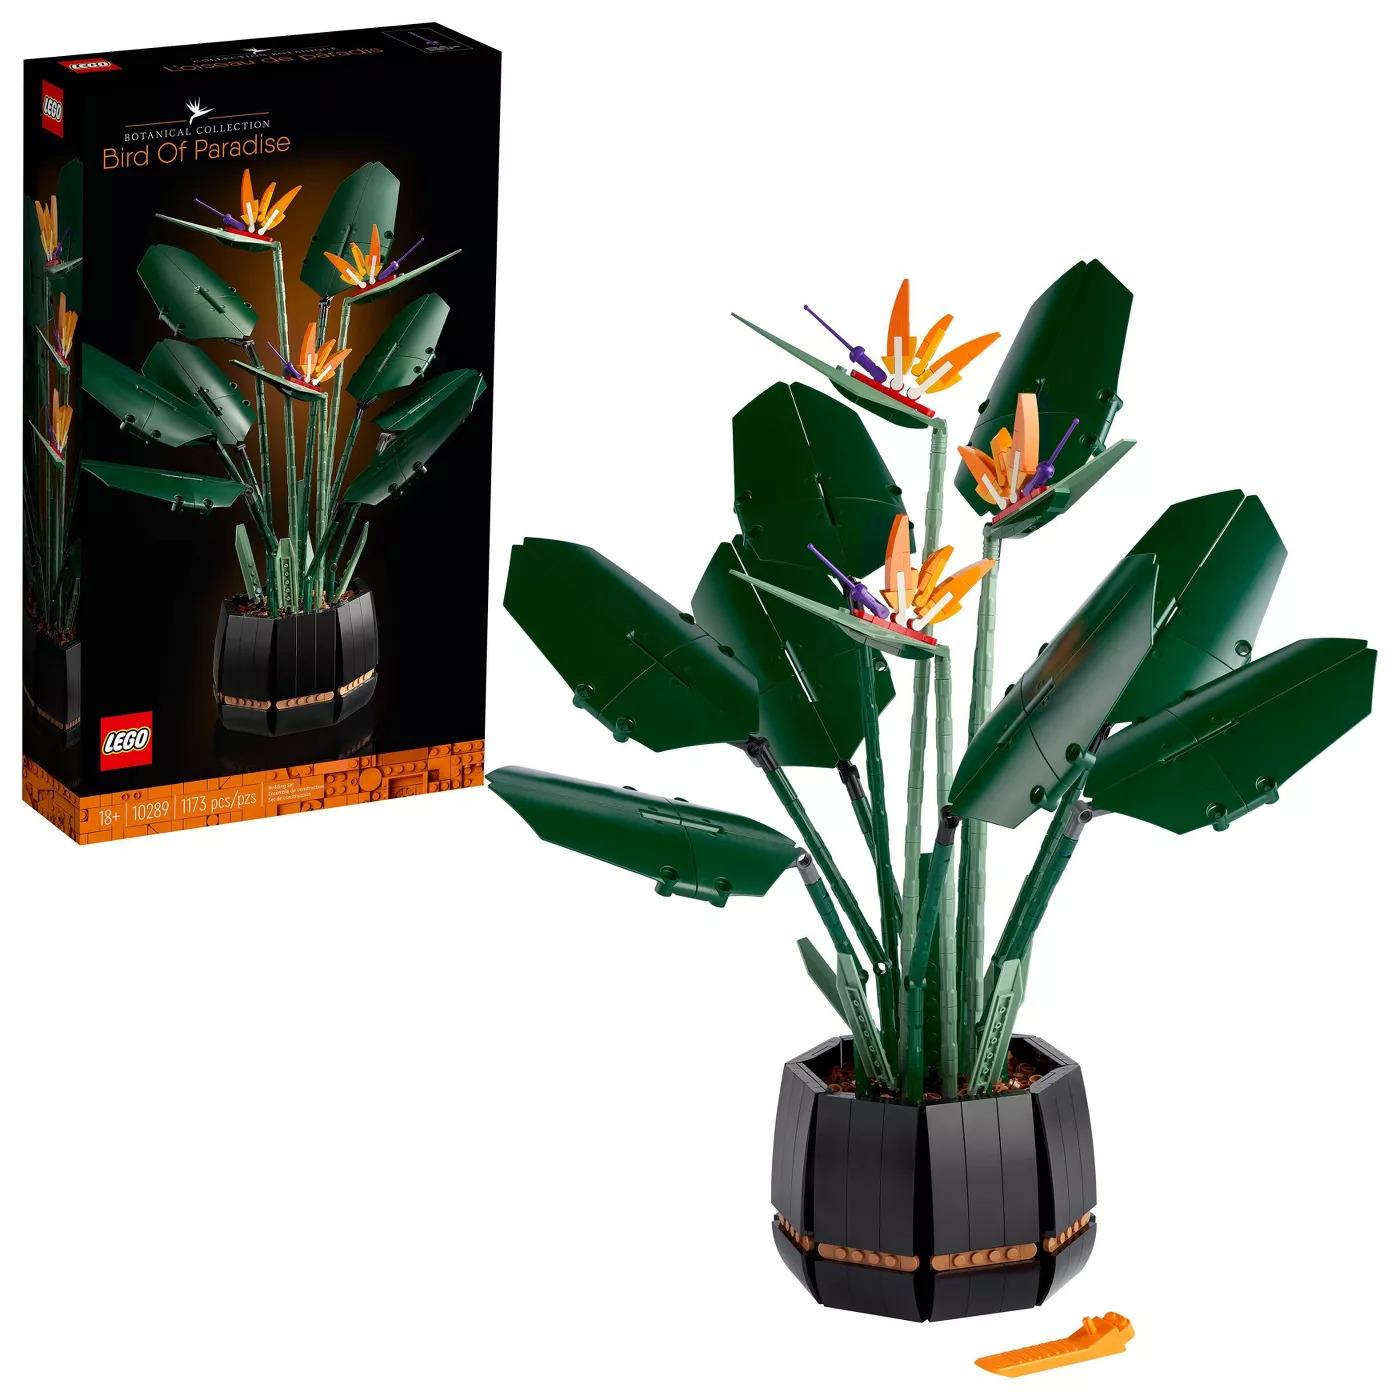 1173-Piece LEGO Bird of Paradise Plant Building Kit for $79.99 Shipped